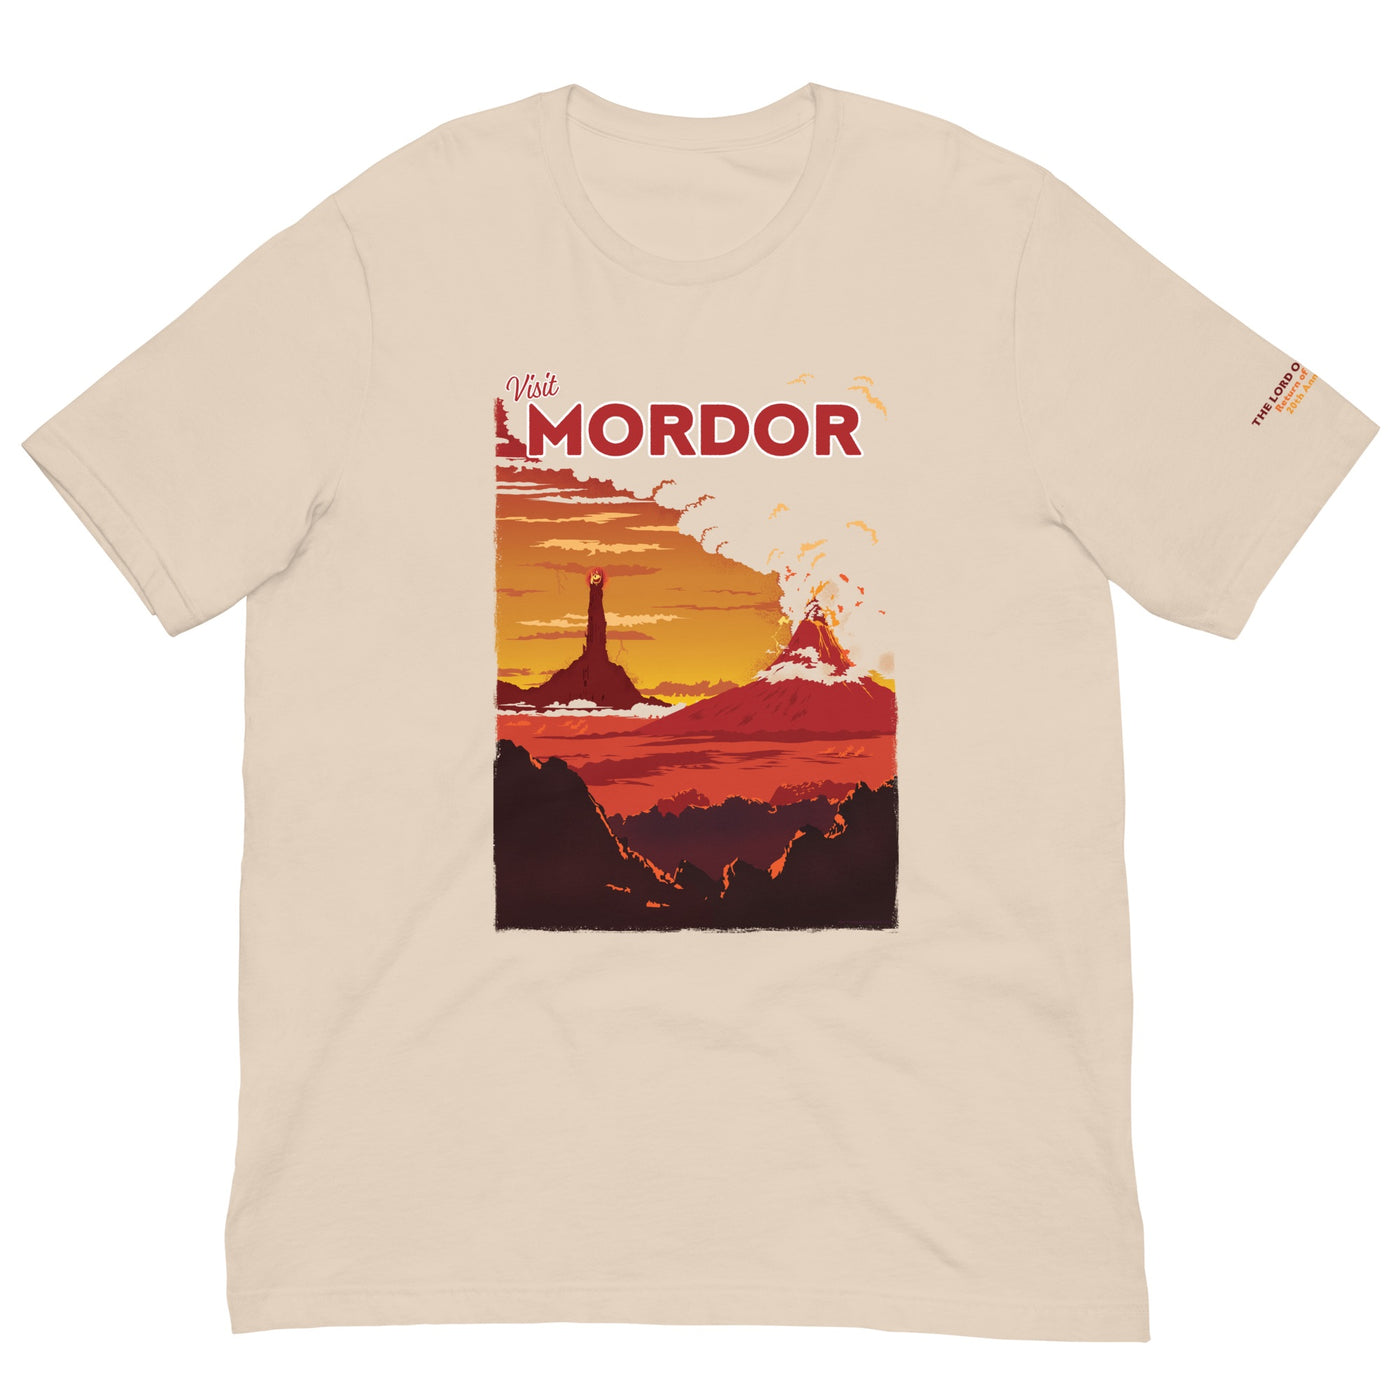 The Lord of the Rings Visit Mordor Tee